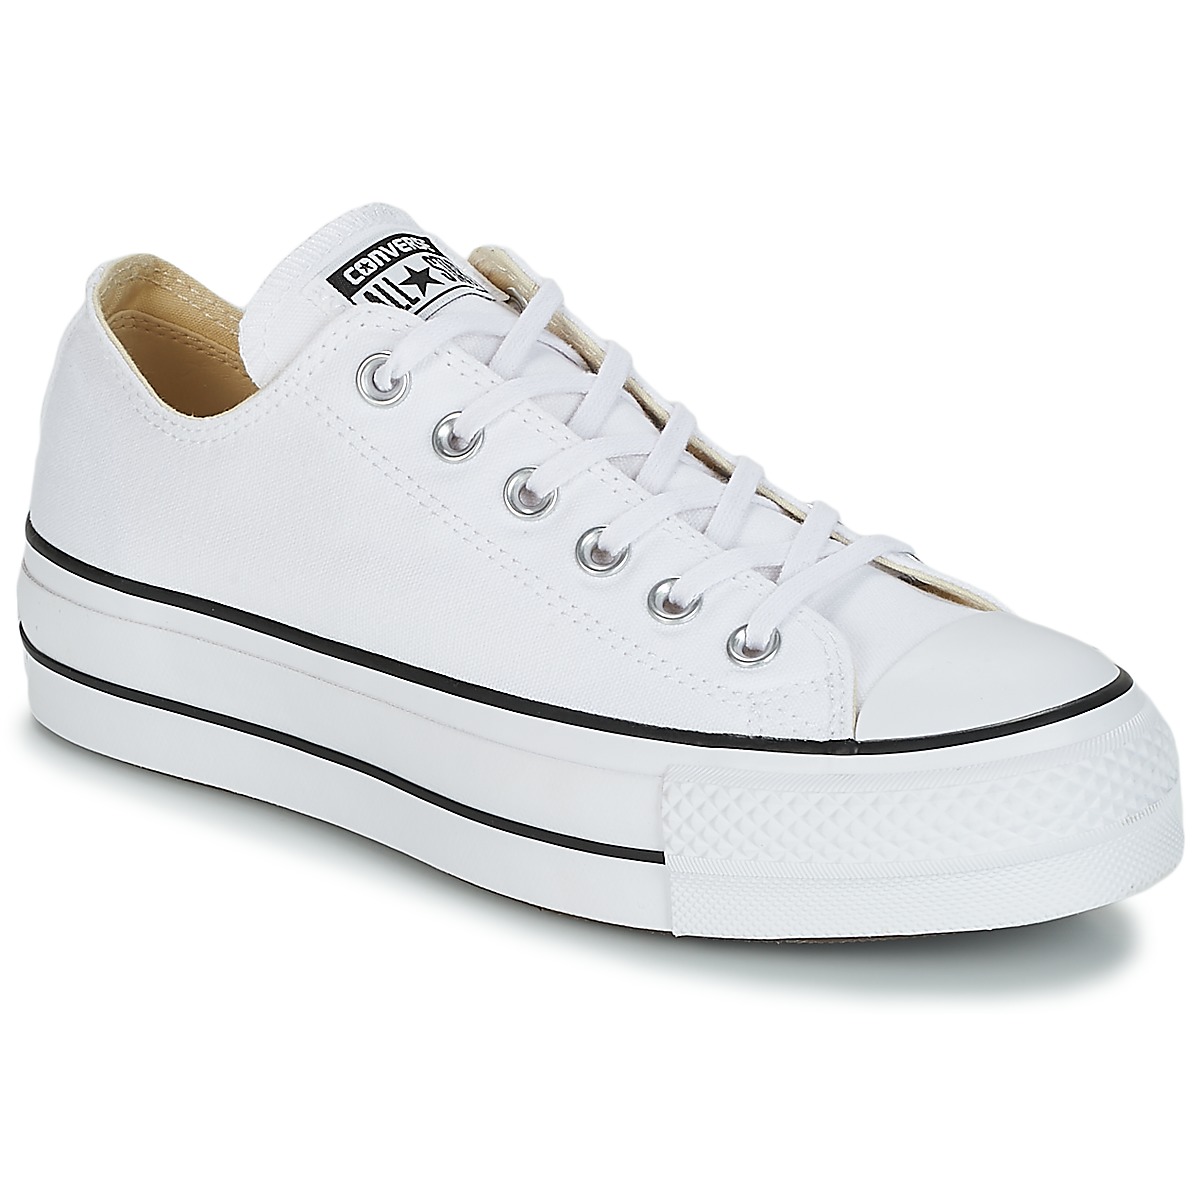 Purchase > converse compensée blanche femme, Up to 72% OFF